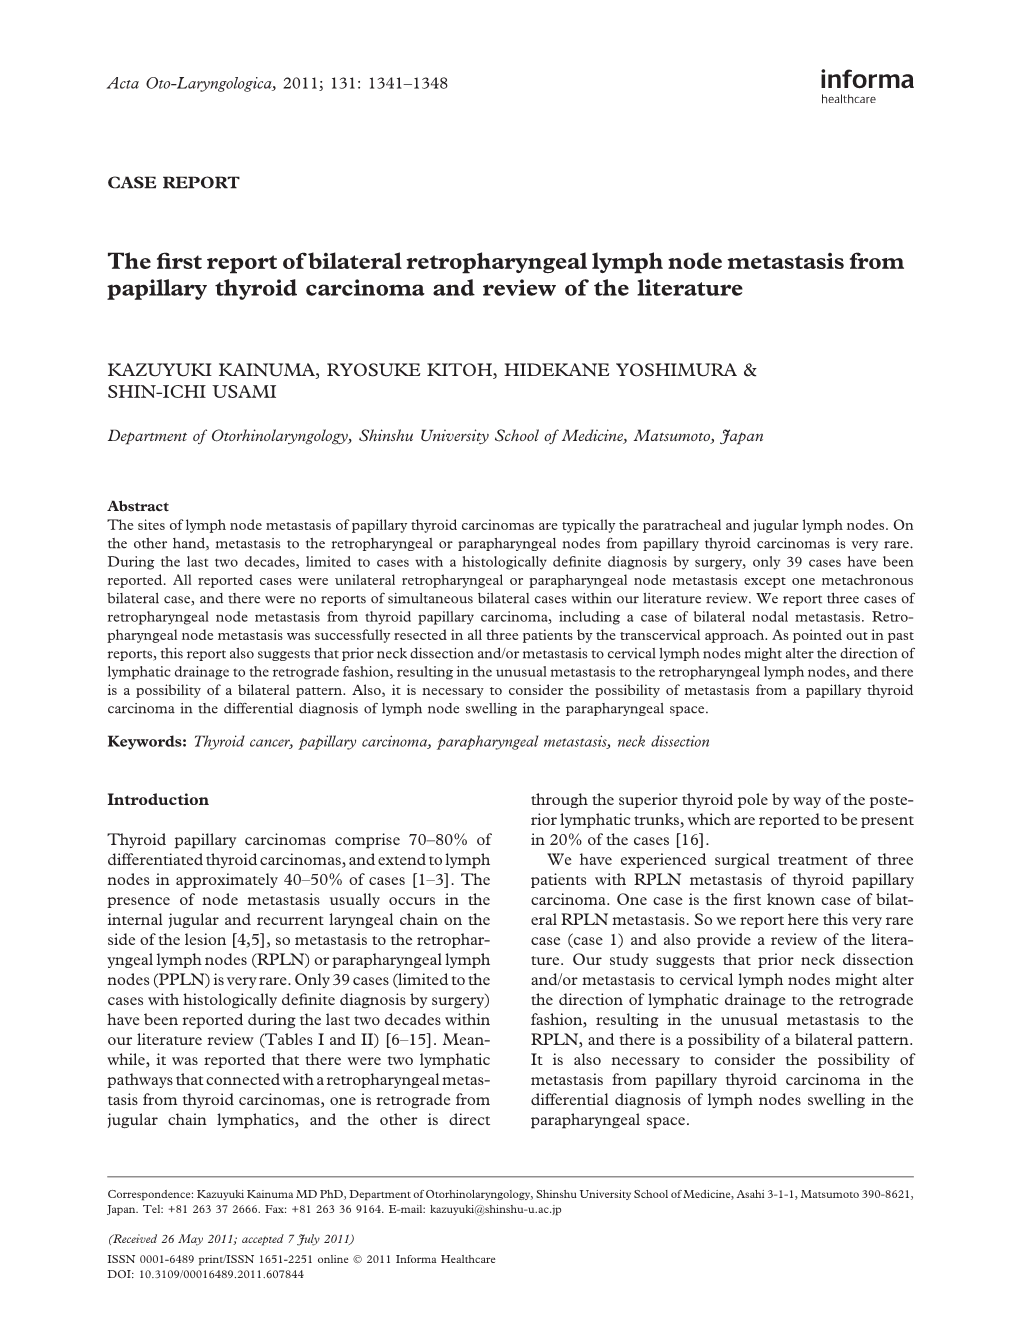 The First Report of Bilateral Retropharyngeal Lymph Node